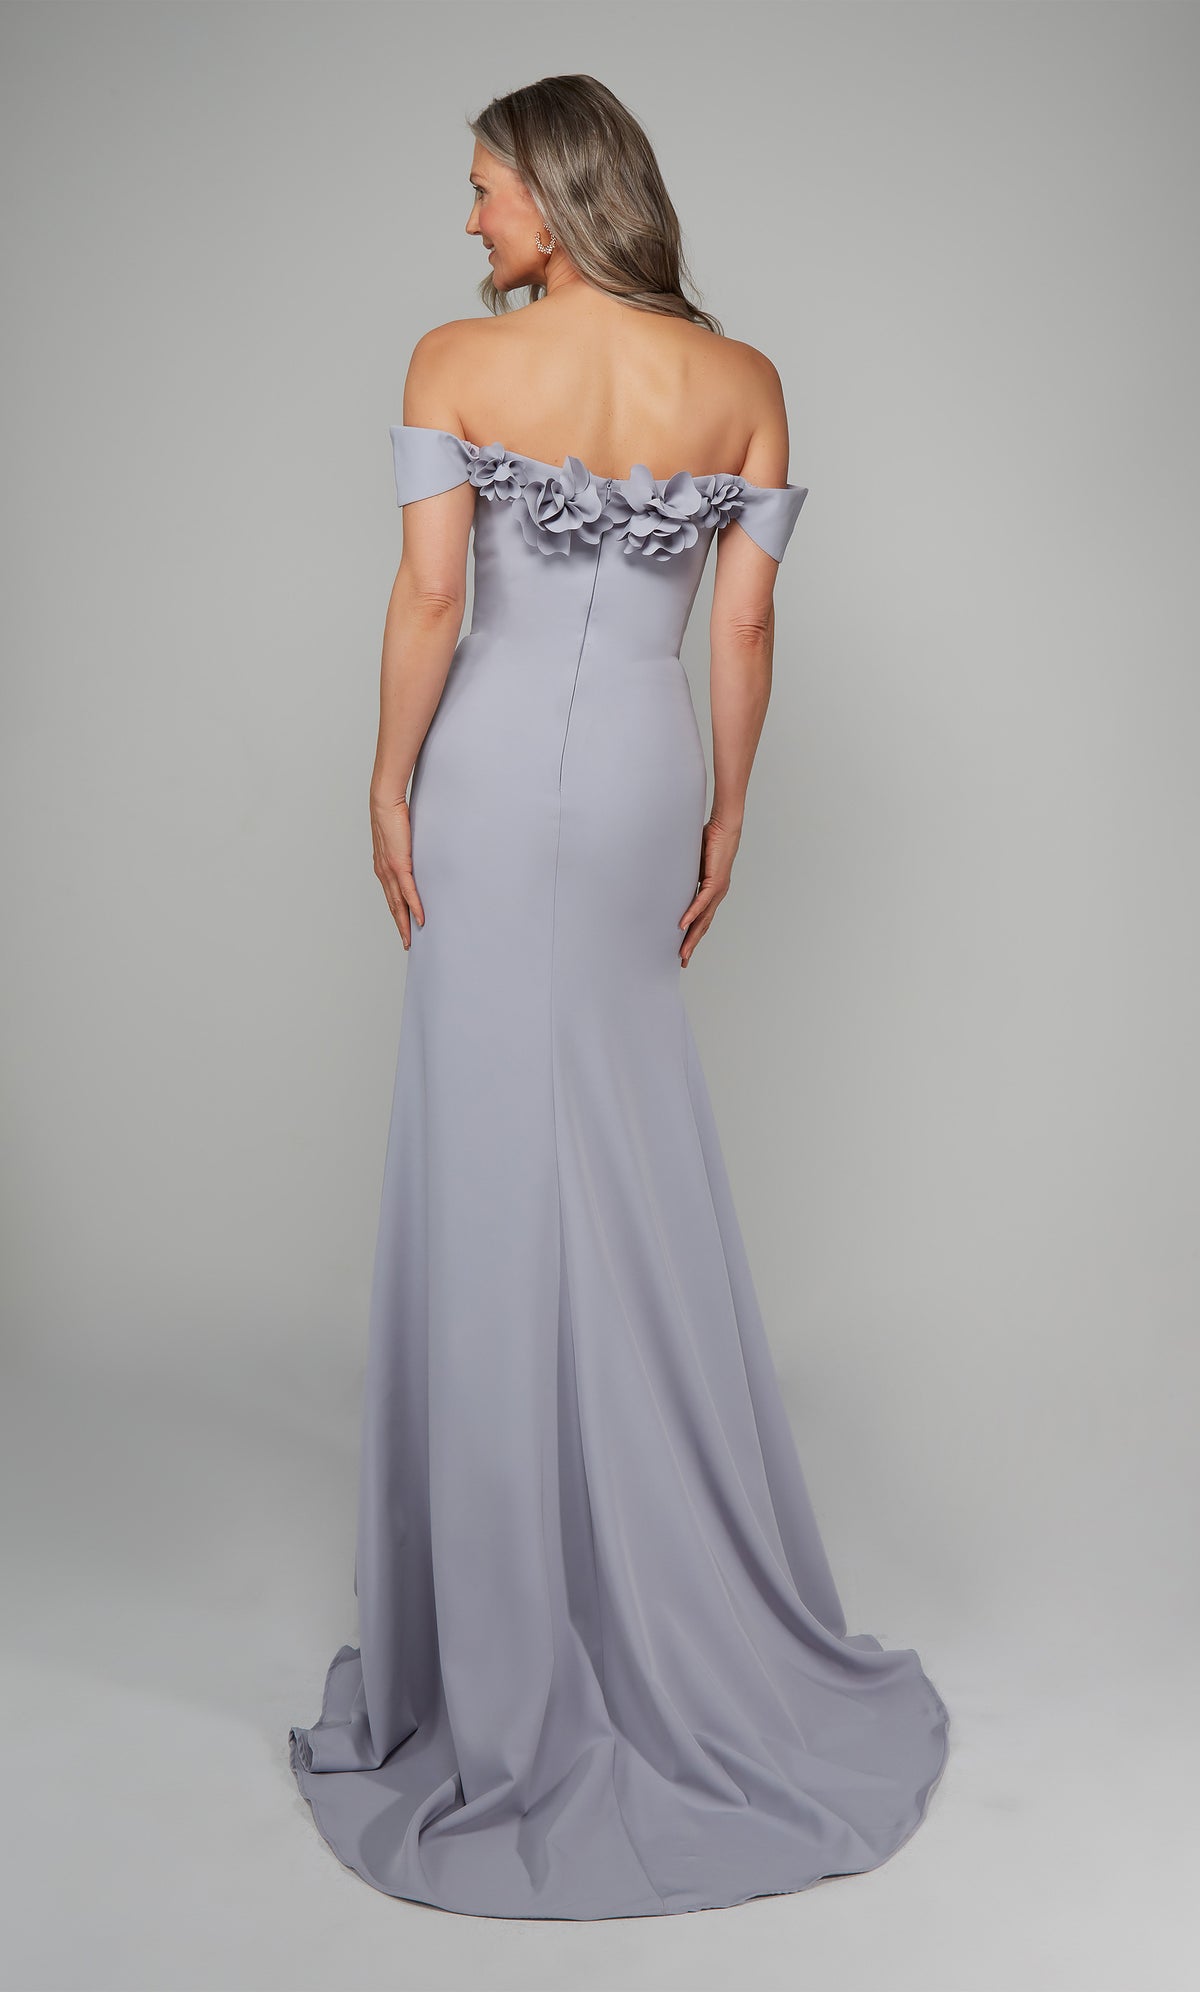 Ice blue fit and flare mother of the bride dress featuring an off the shoulder bodice enhanced with a beautiful flower volant and train.